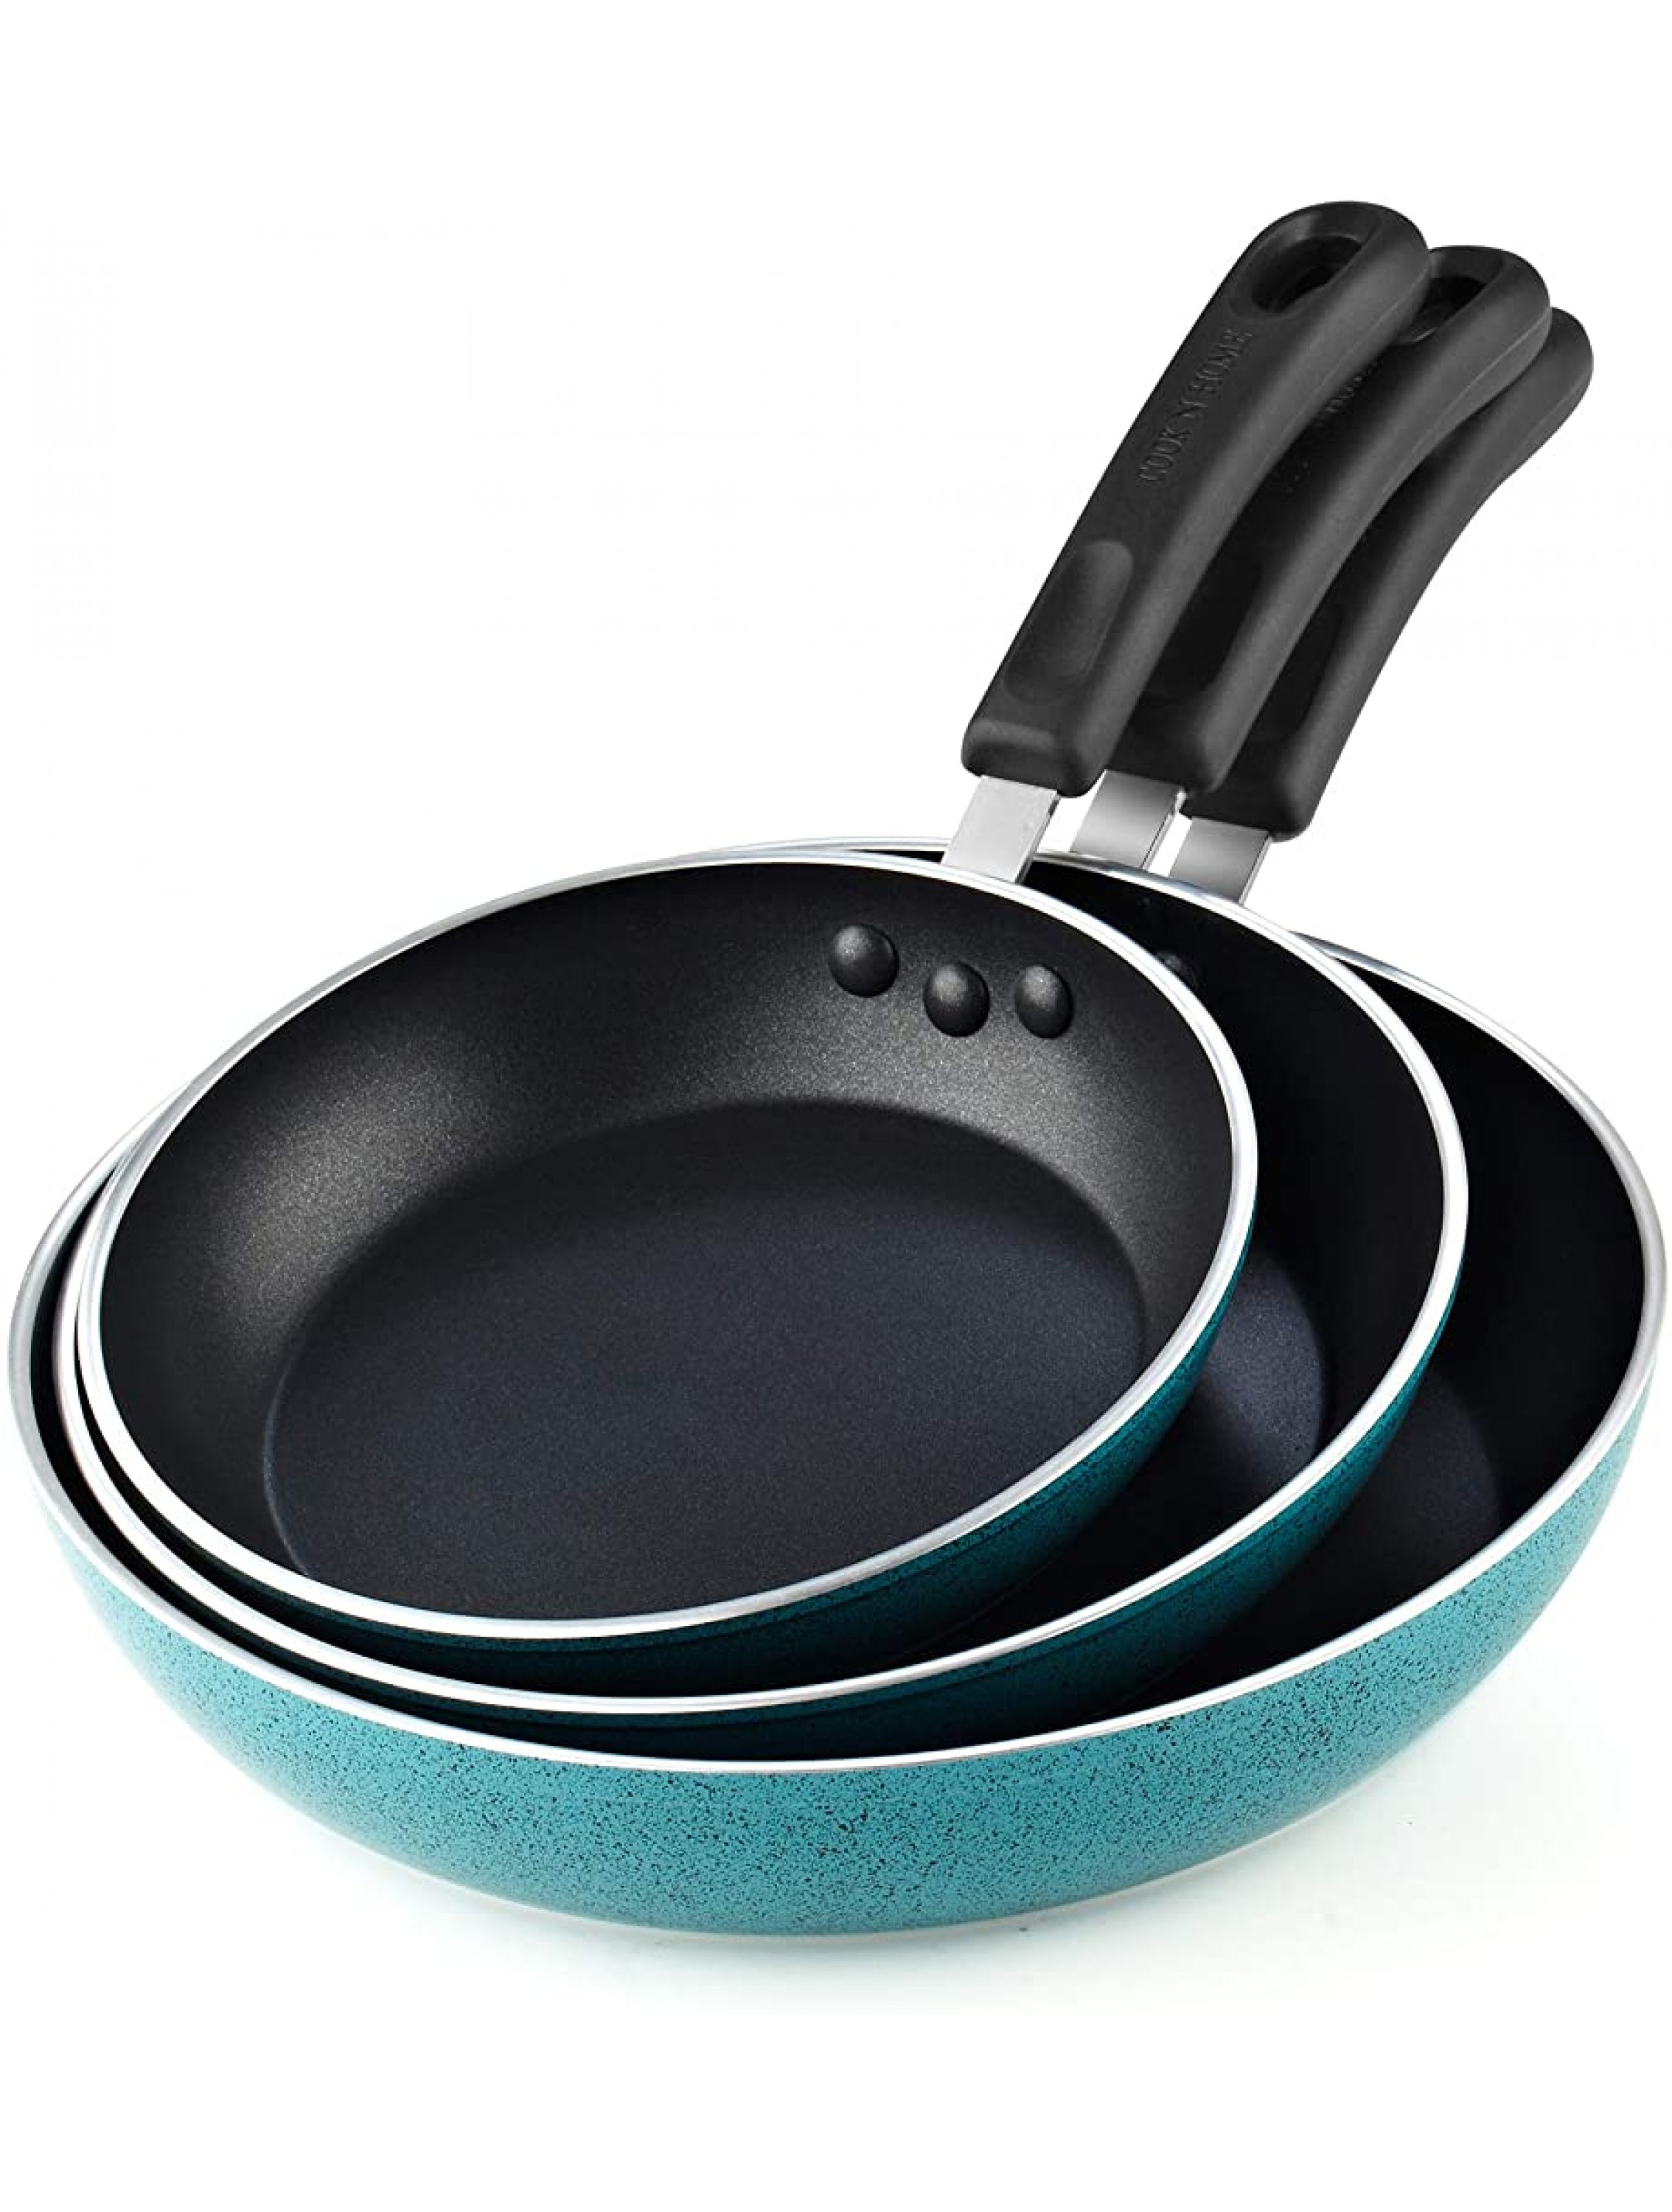 Cook N Home Nonstick Saute Fry Pan 8 9.5 and 11-Inch Turquoise - BYGKPH9BH